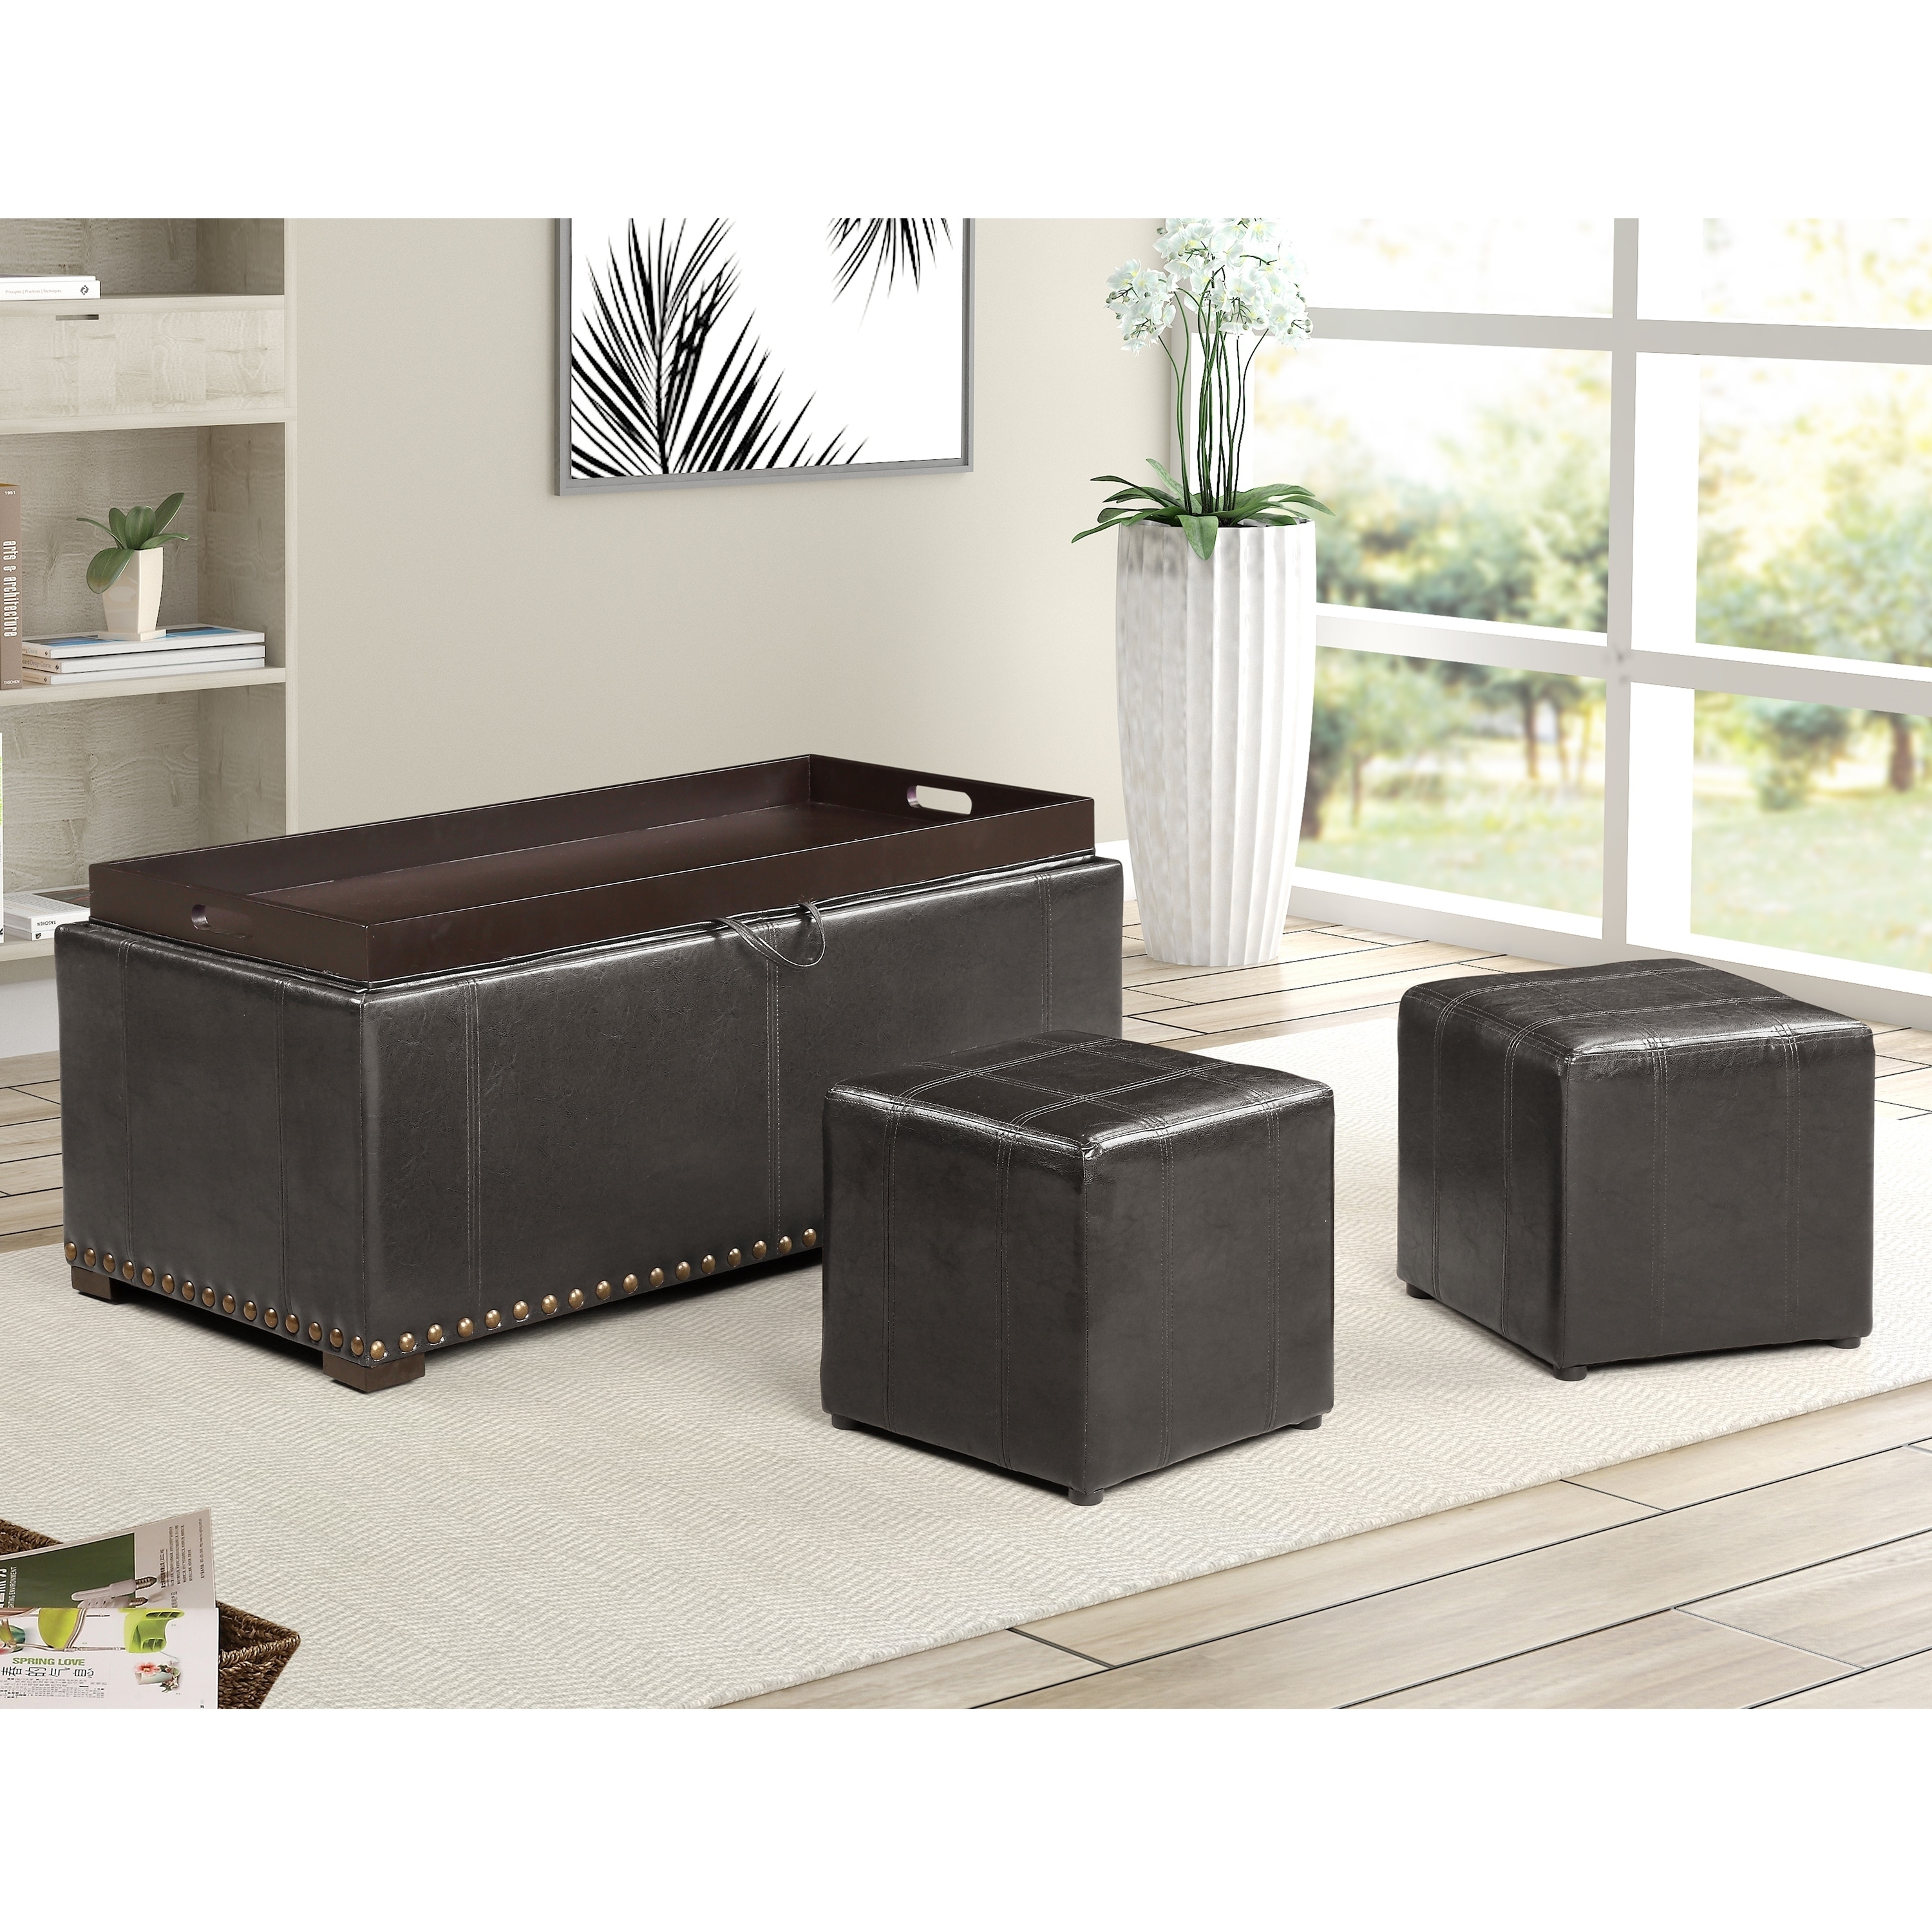 Folding Storage Ottoman With Seat Back Footstool Space